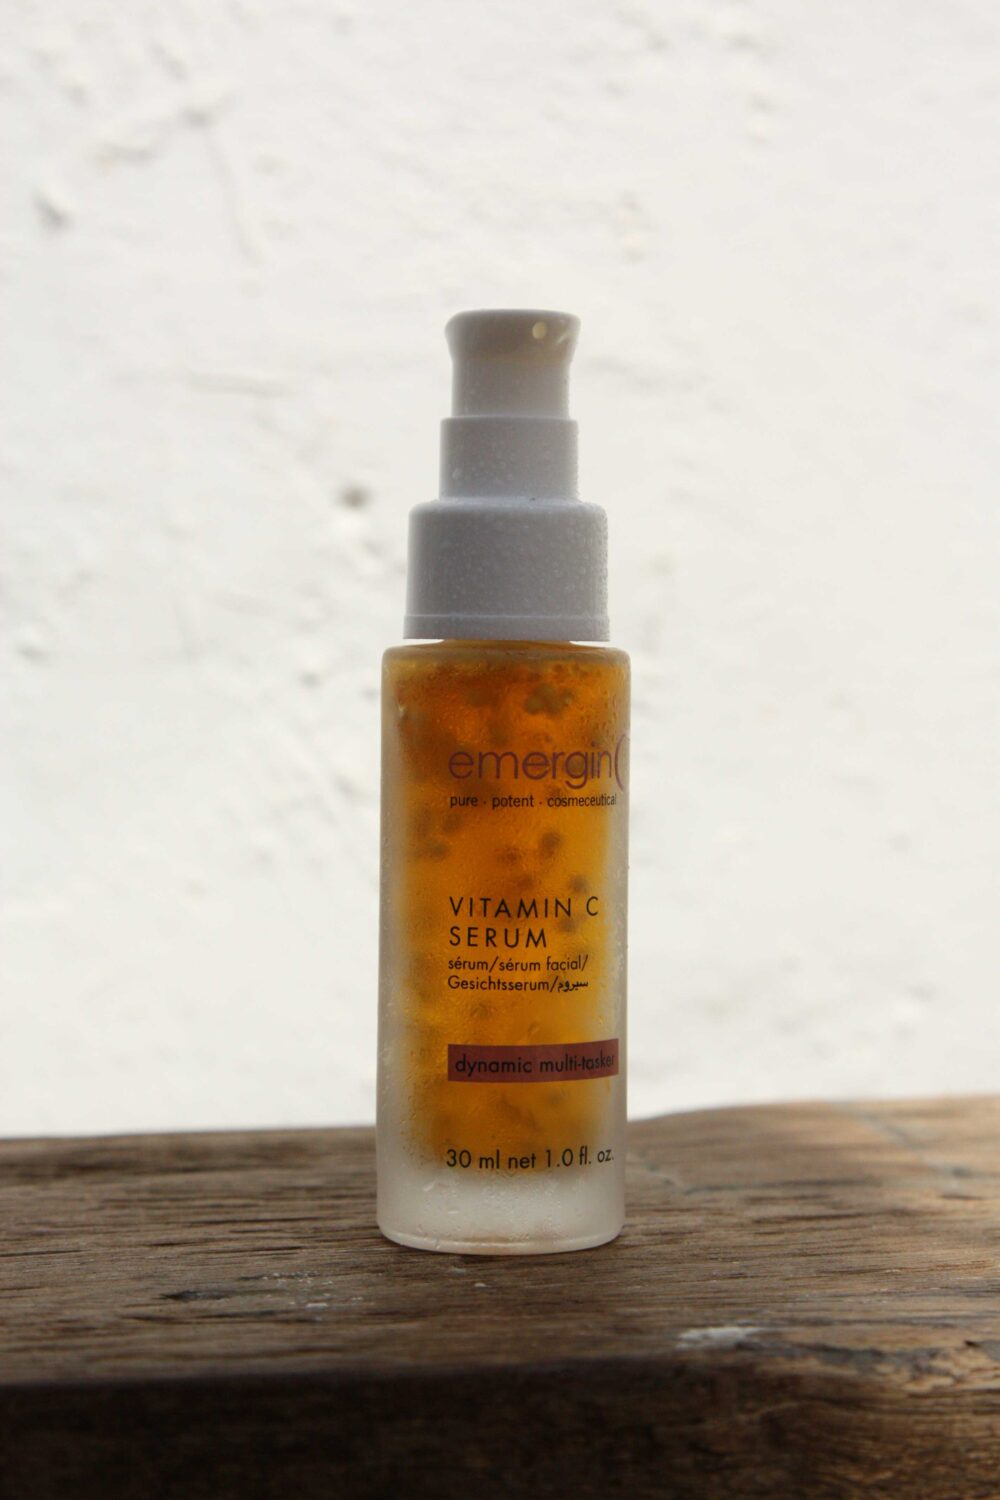 The emerginC vitamin C serum photographed in daylight with white wall in the background